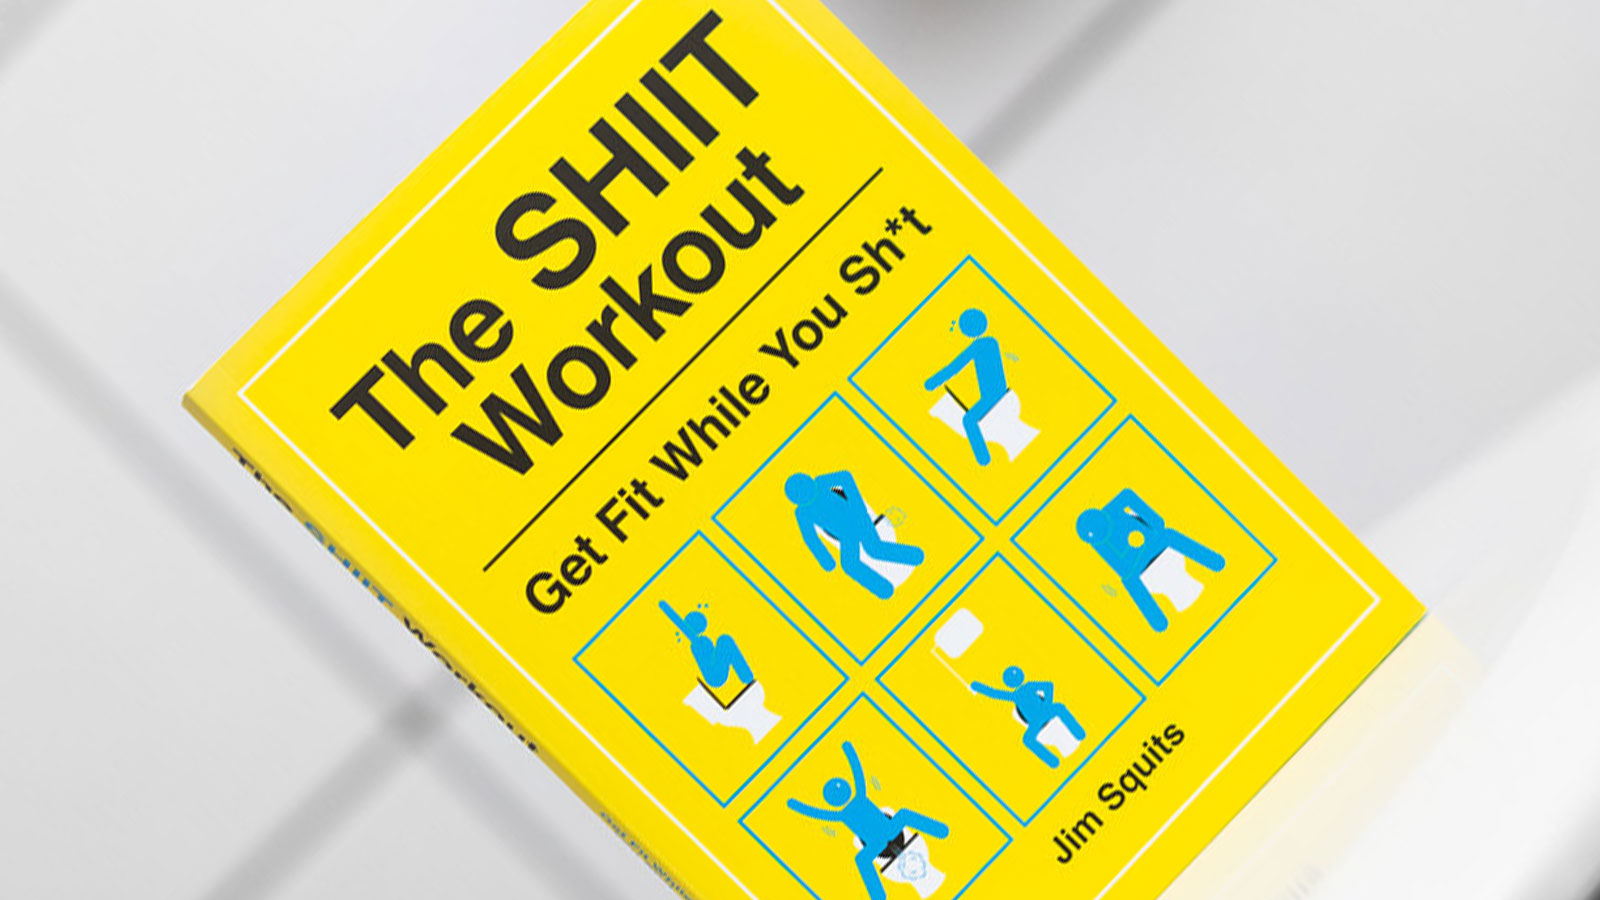 The SHIIT Workout